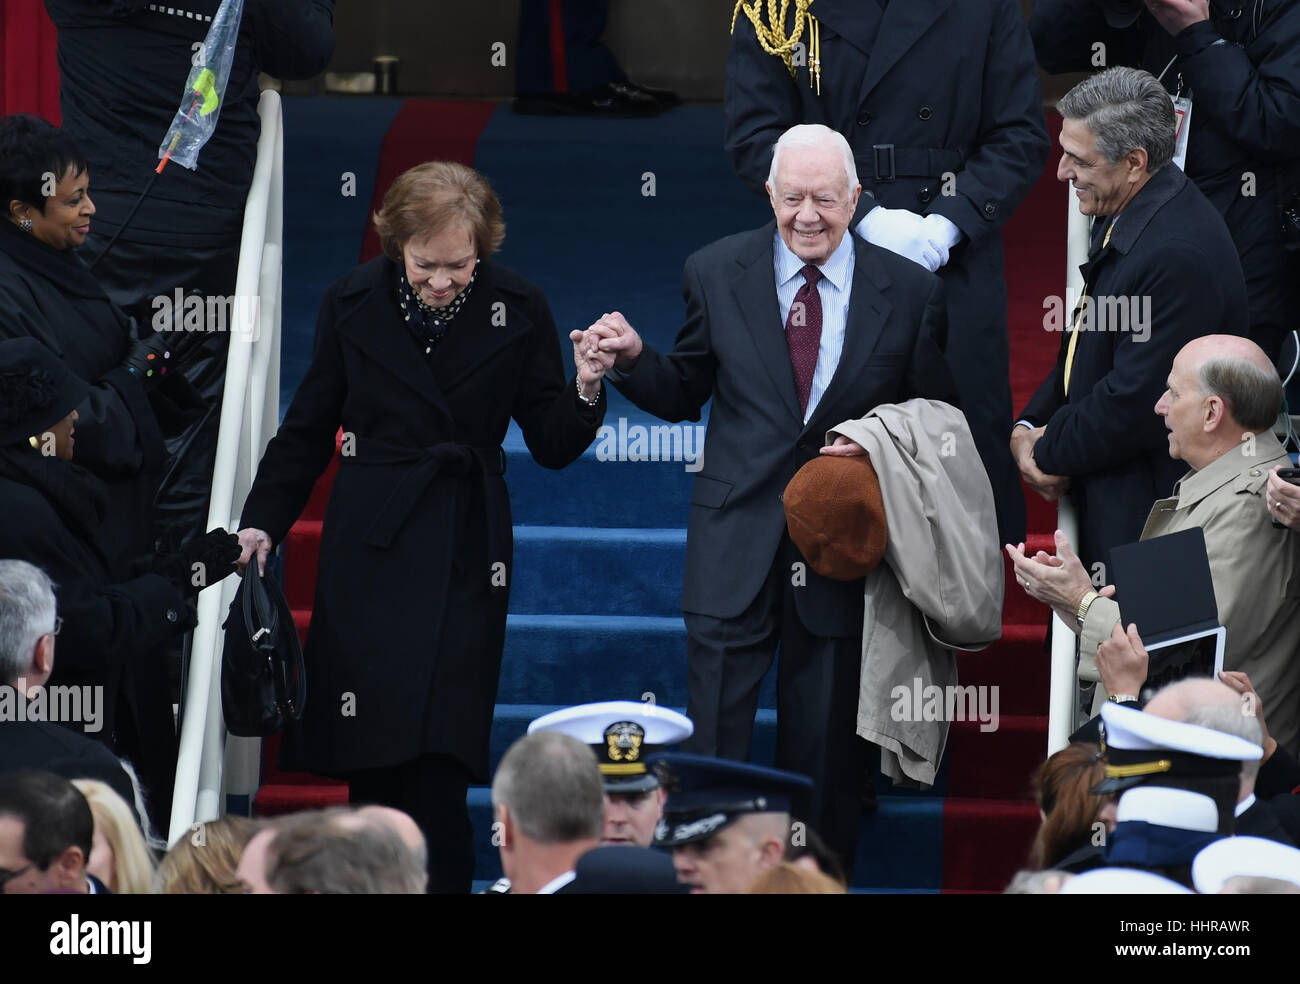 Washington, USA. 20th January, 2017. Washington, USA. 20th Jan, 2017. Former President Jimmy Carter and wife Rosalynn walk down the steps during the Inauguration Ceremony of President Donald Trump on the West Front of the U.S. Capitol on January 20, 2017 in Washington, DC Trump became the 45th President of the United States. Photo by Pat Benic/UPI /CNP/MediaPunch Credit: MediaPunch Inc/Alamy Live News Stock Photo